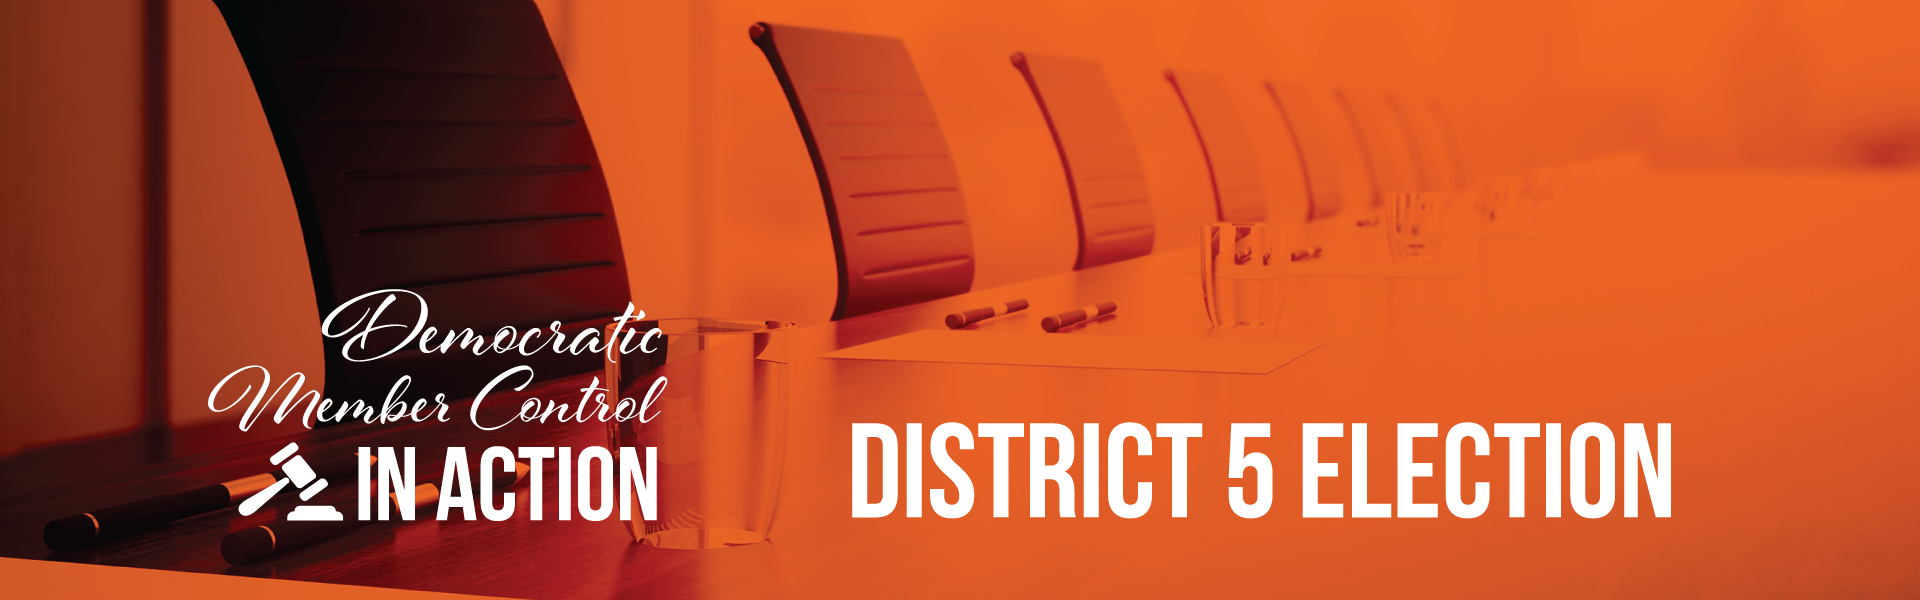 Democratic Member Control in action! District 5 election, click to learn more!